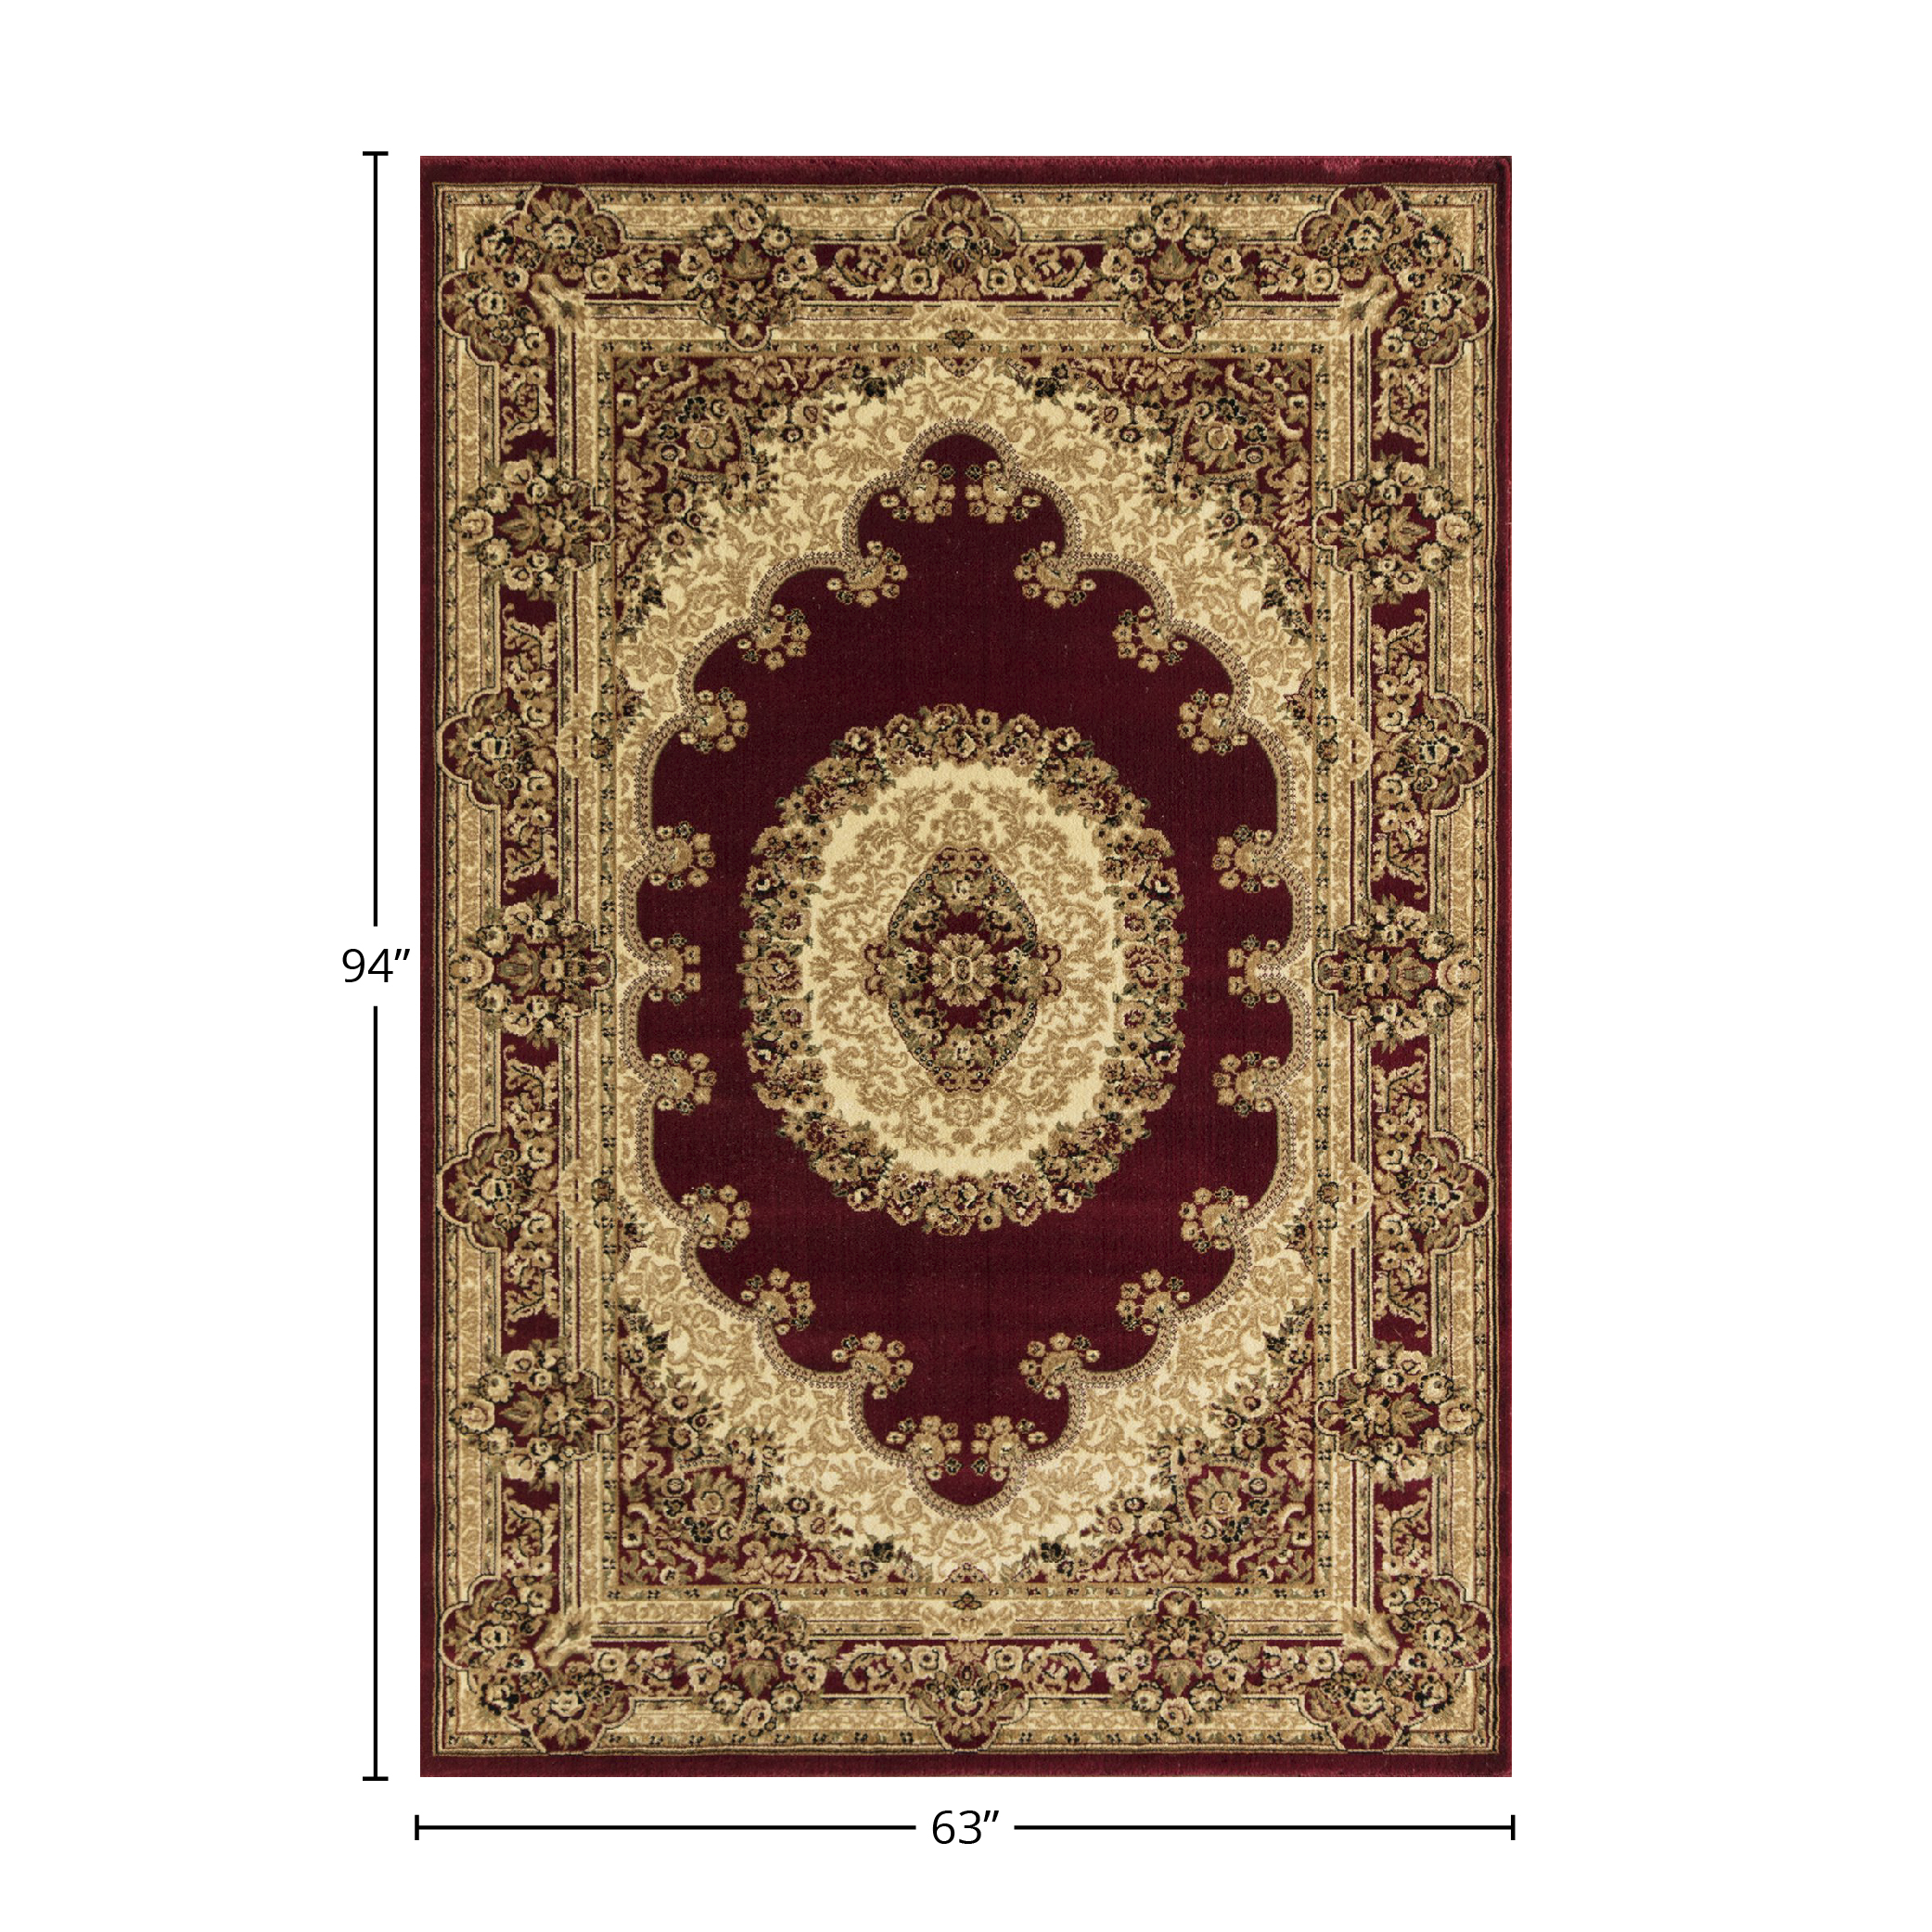 Rugs America Vista 807-RED Kerman Red Oriental Traditional Red Area Rug, 5'3"x7'10" - image 3 of 5